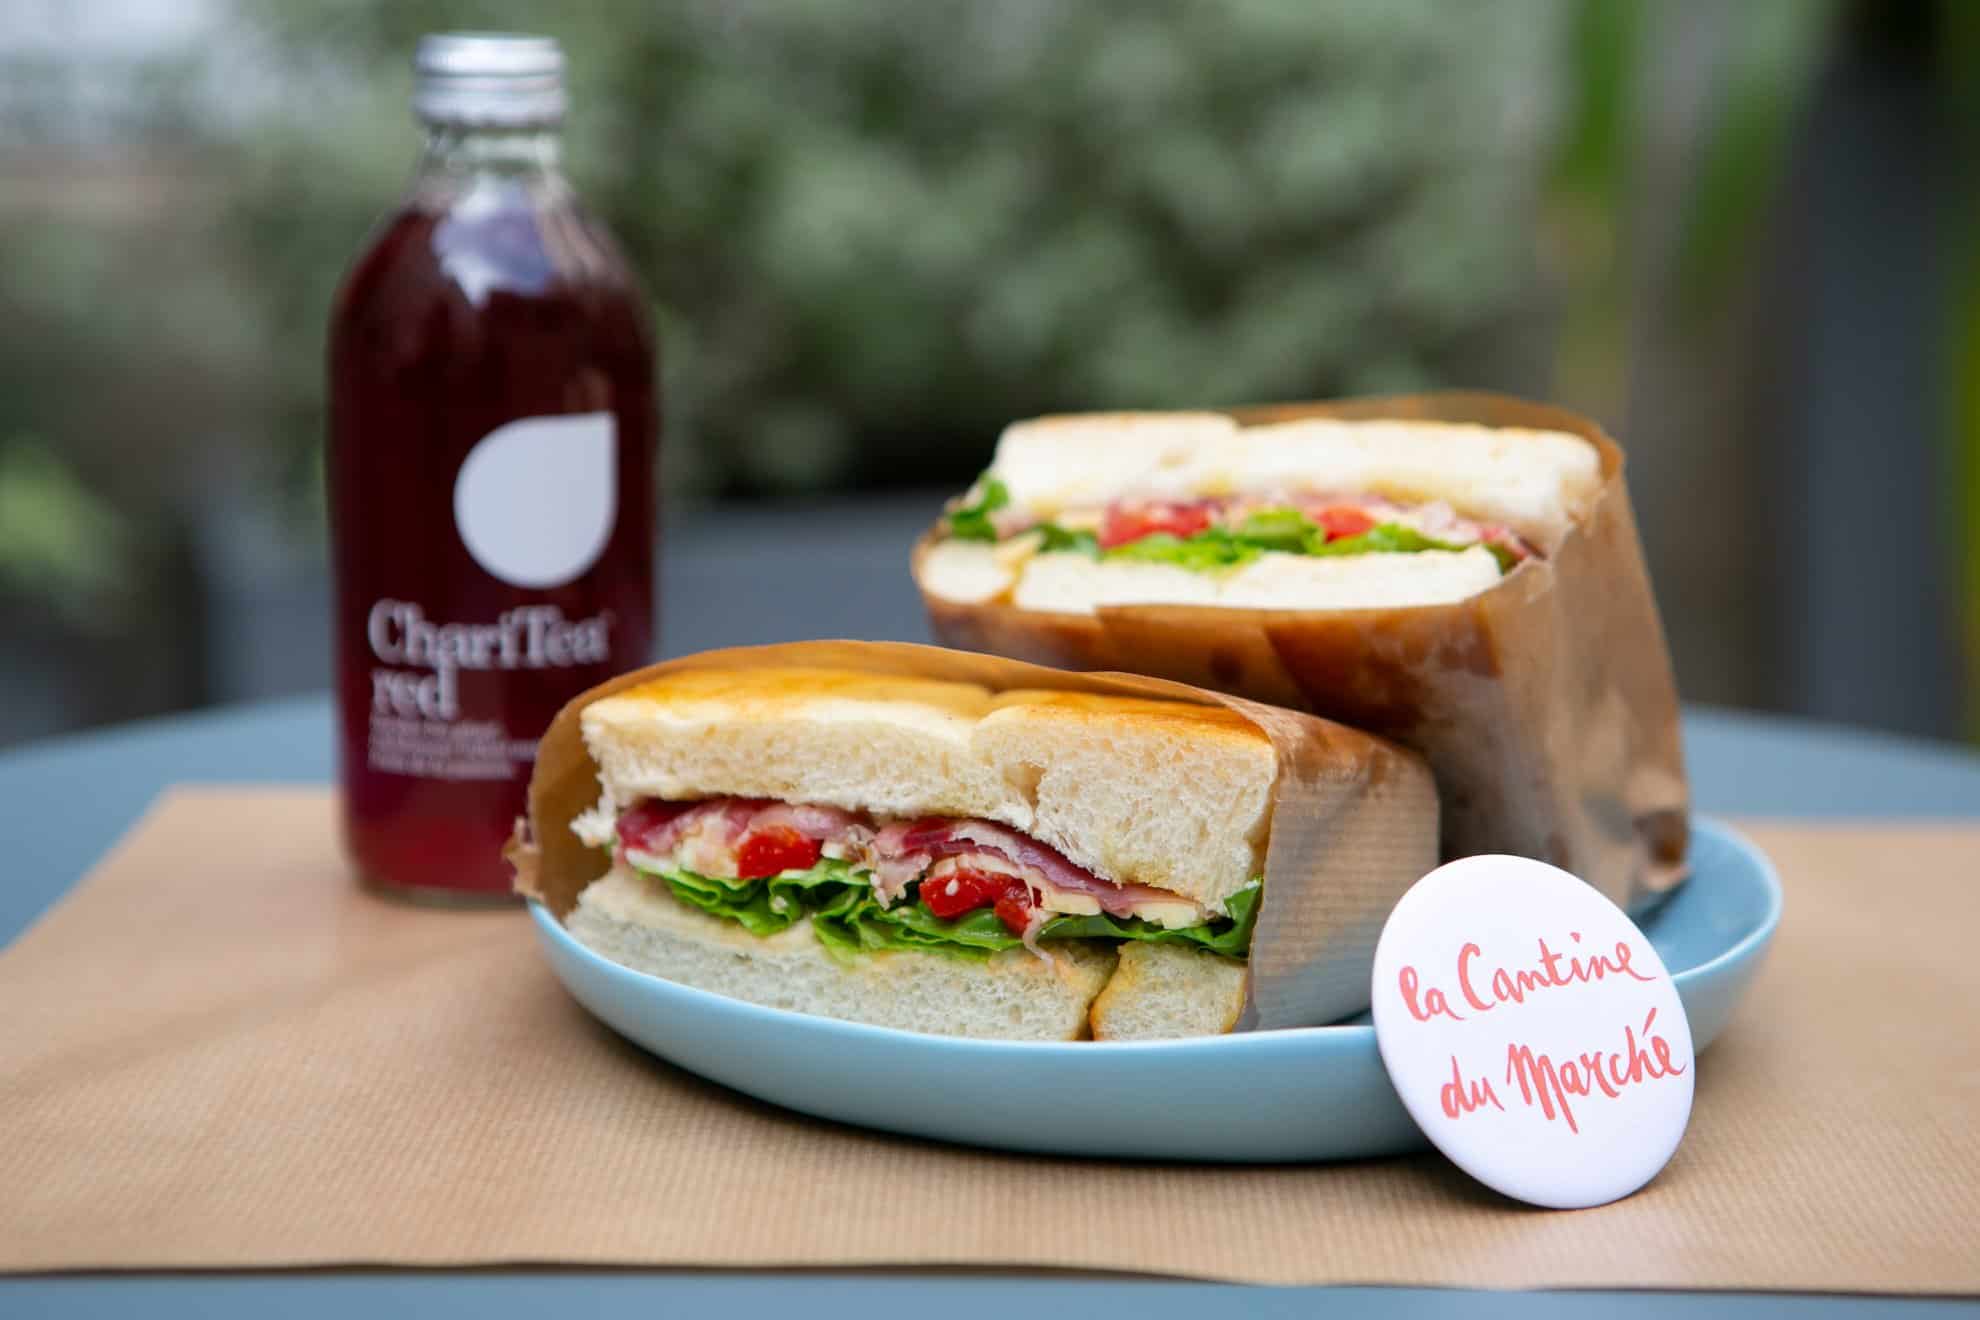 Sustainable food in Paris at La Cantine du Marché, where they serve fresh-pressed juices and teas like this Chari Tea, and homemade ham salad sandwiches on a blue plate.